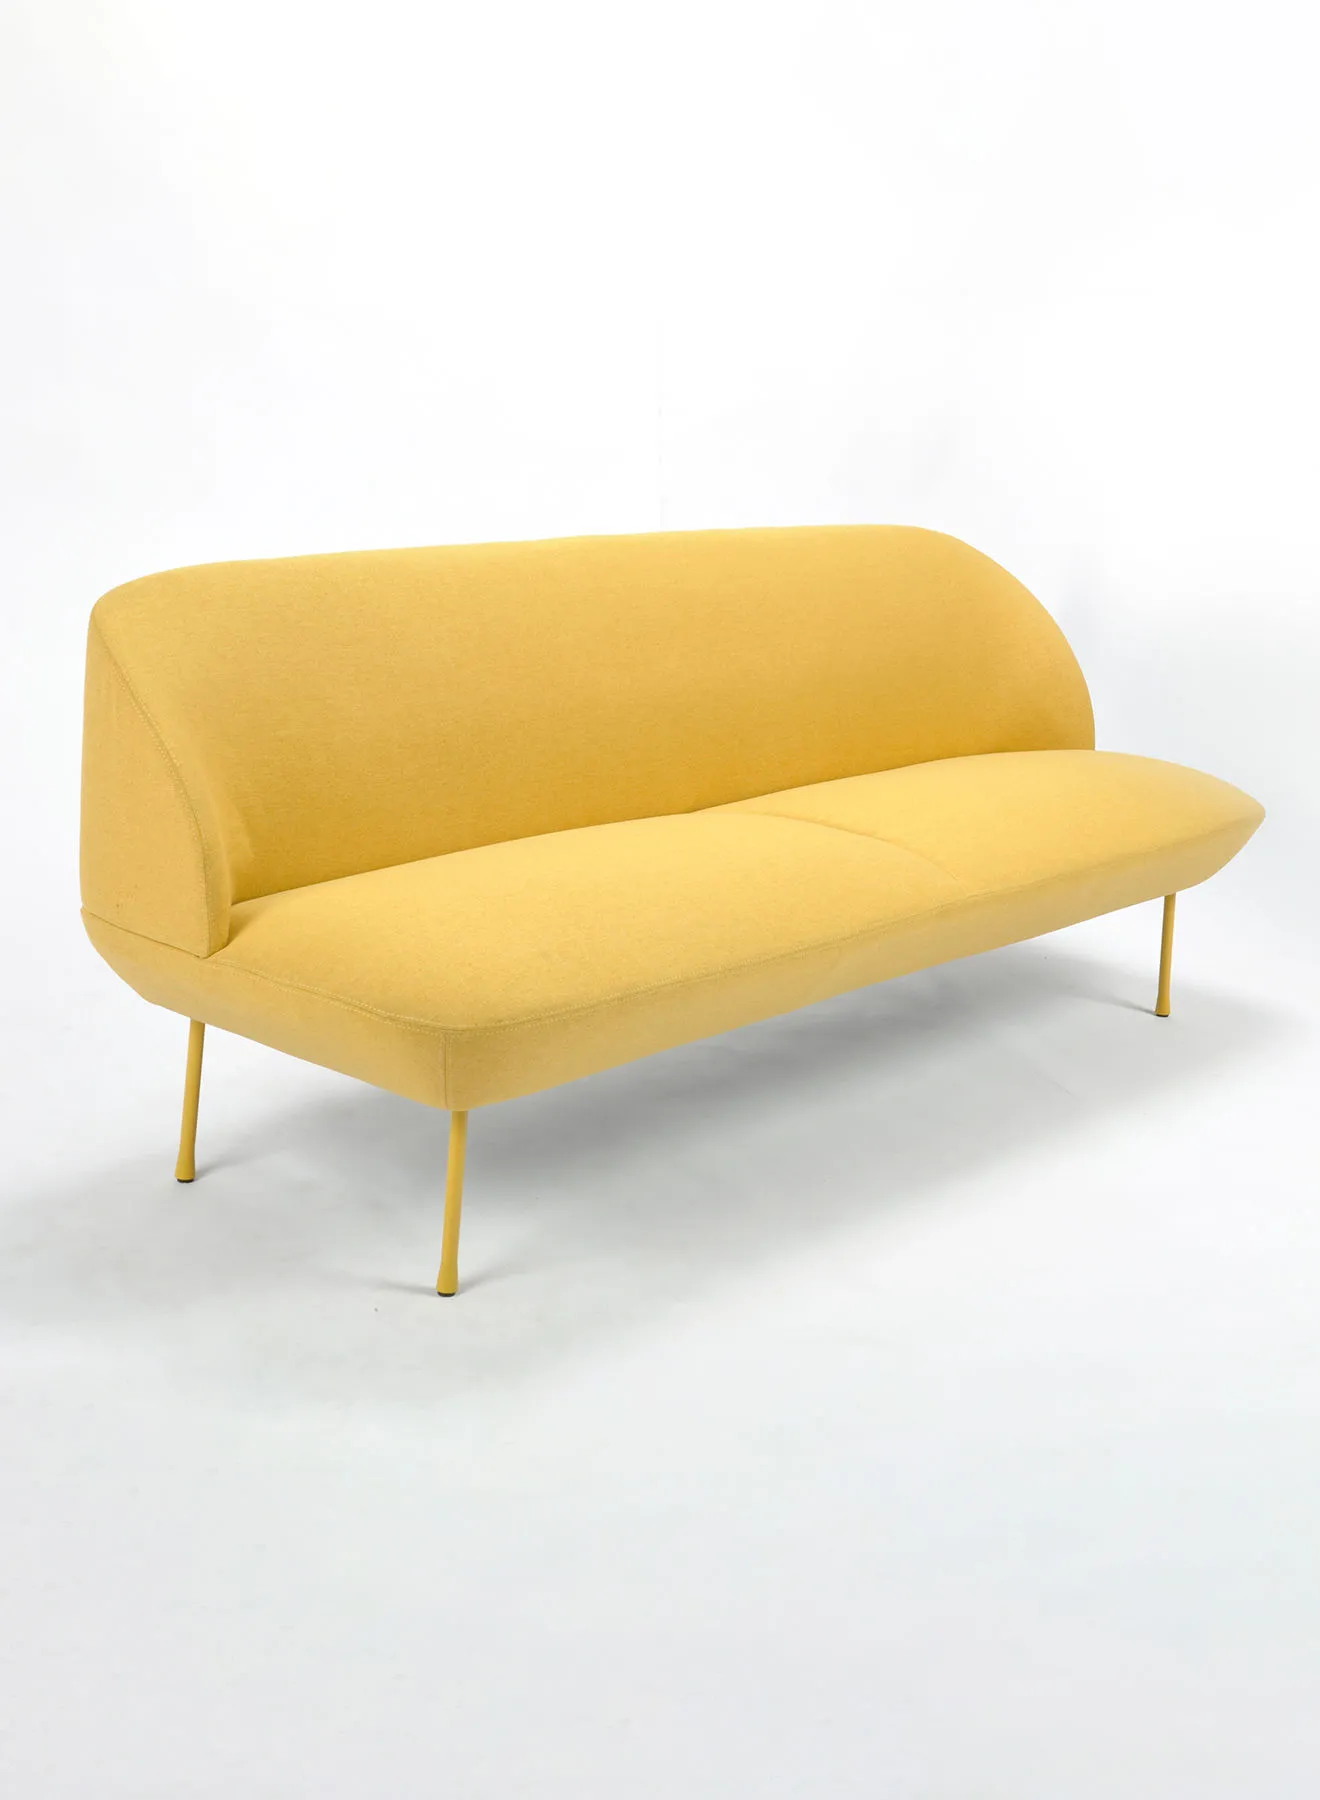 Switch Sofa - Upholstered Fabric Yellow Couch - 200 X 73 X 78 - 3 Seater Sofa Relaxing Sofa